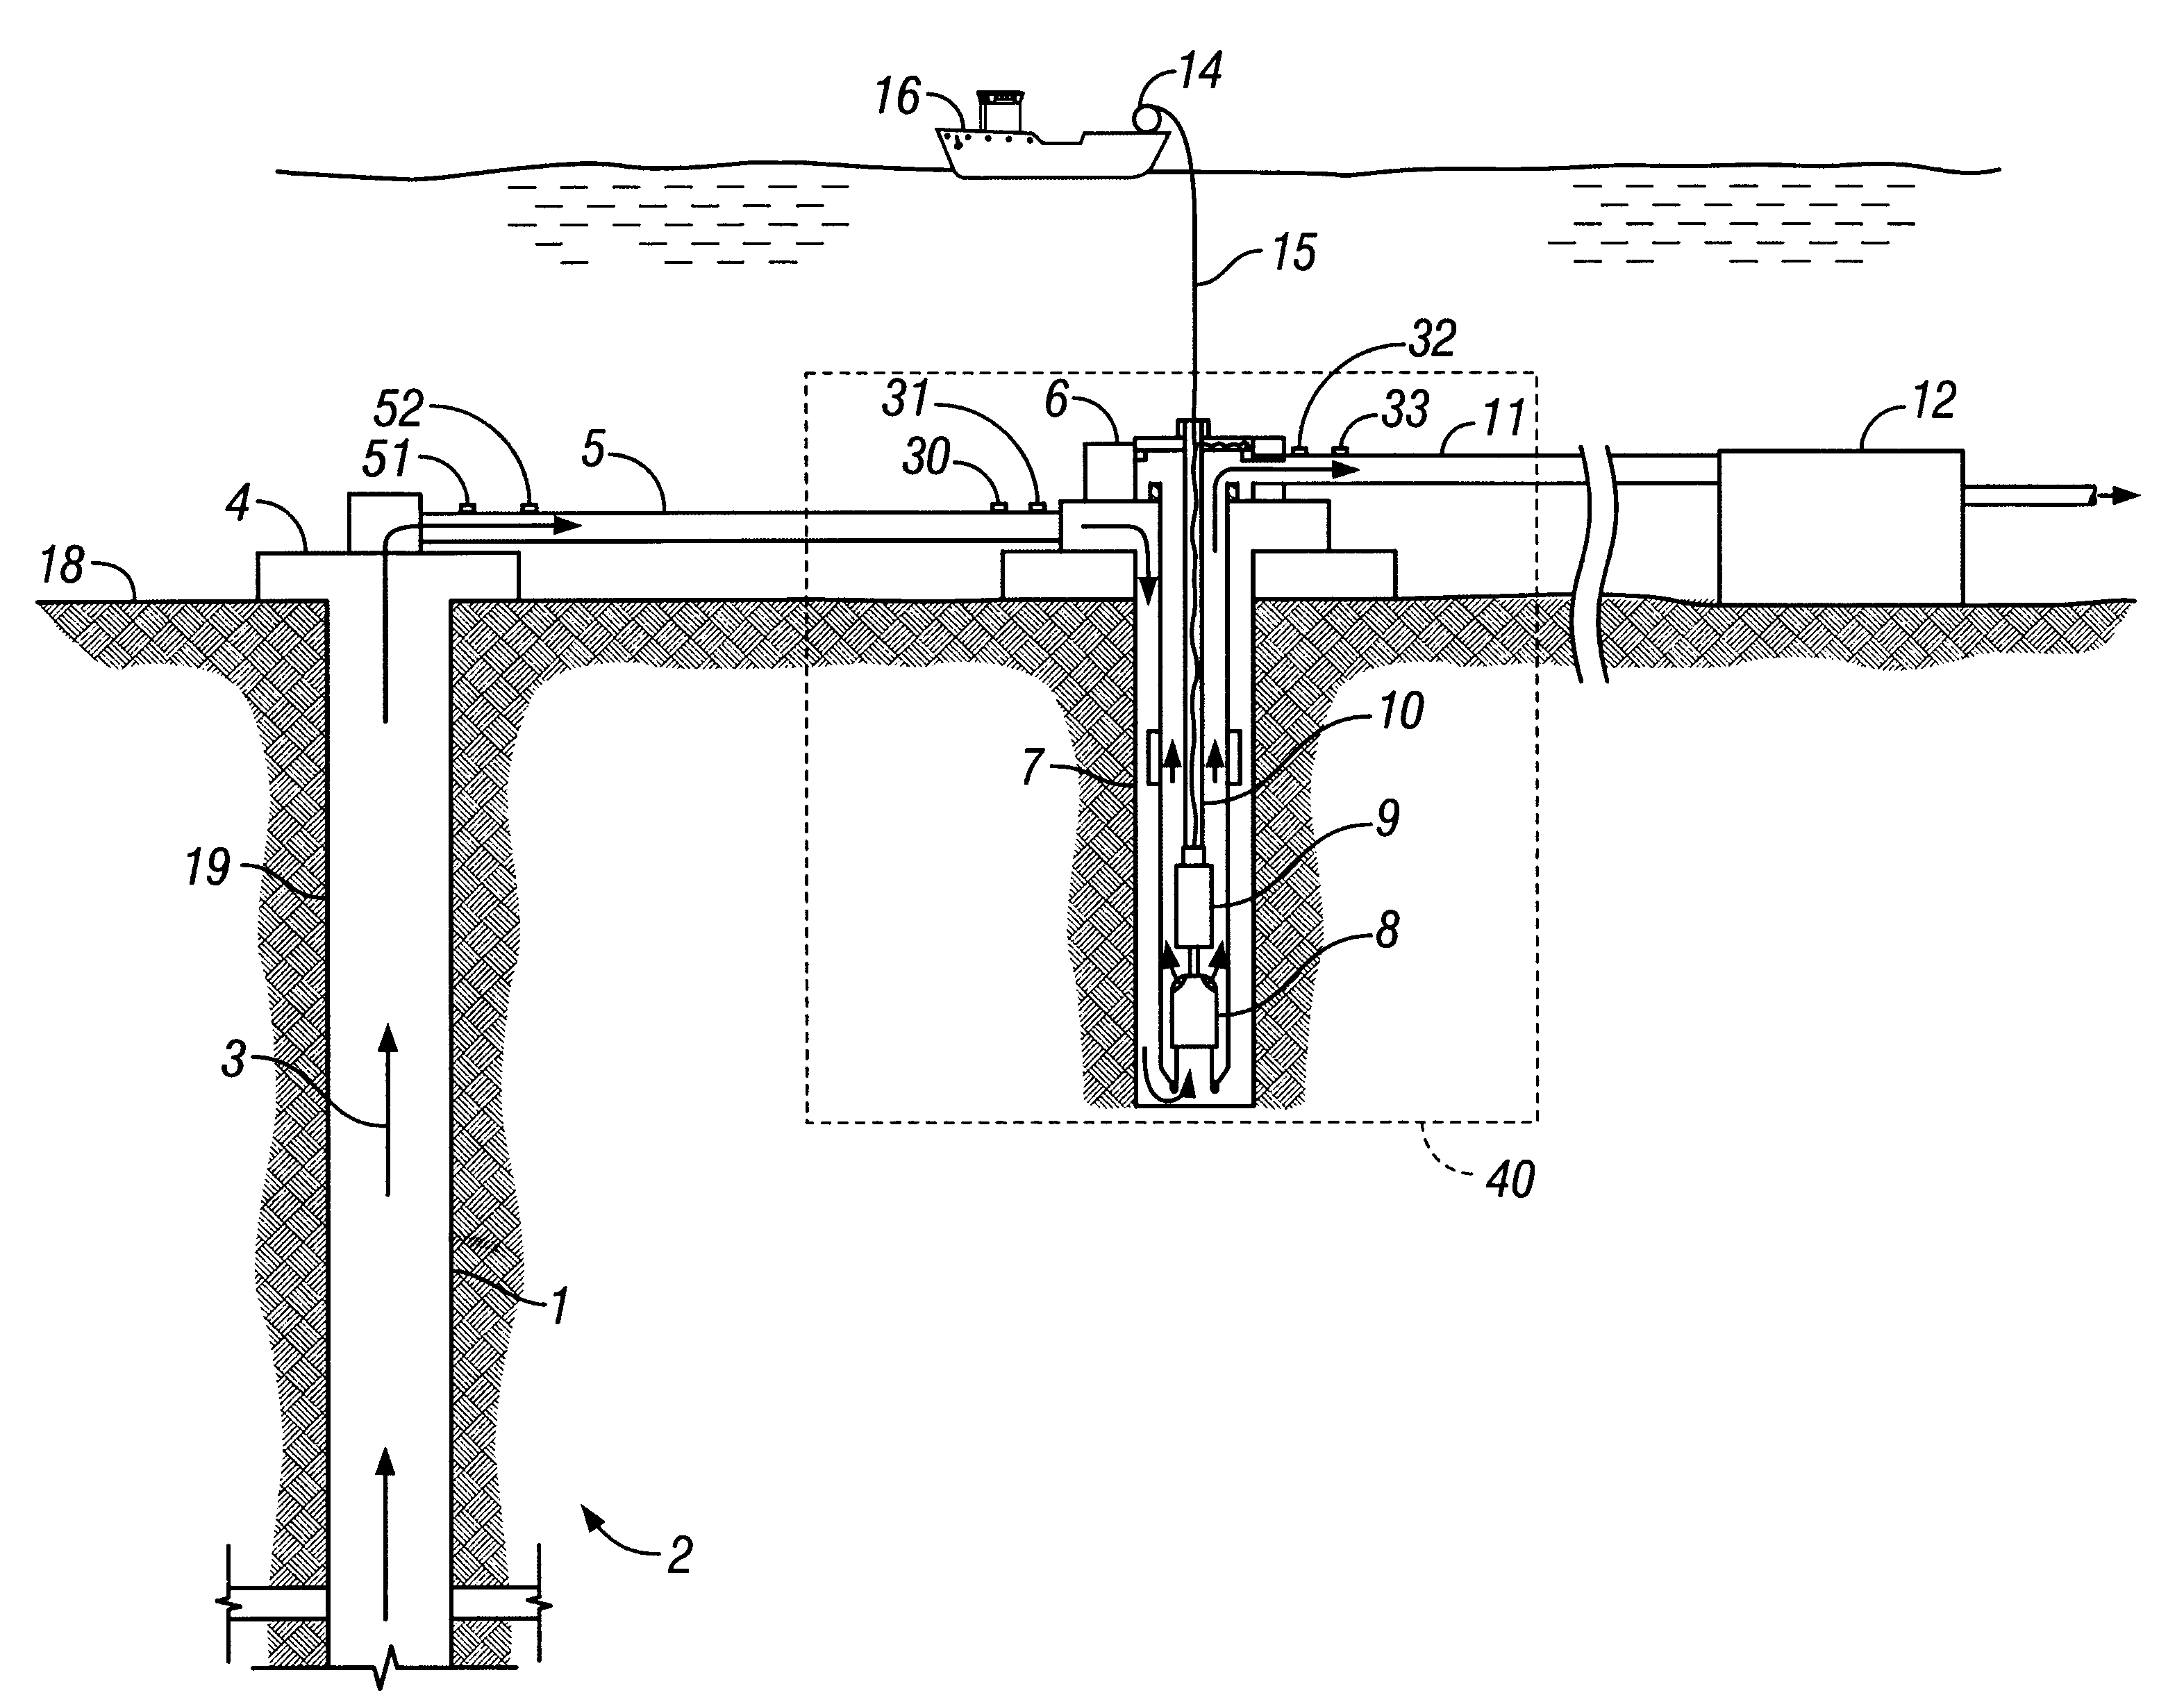 System and method for flow/pressure boosting in a subsea environment